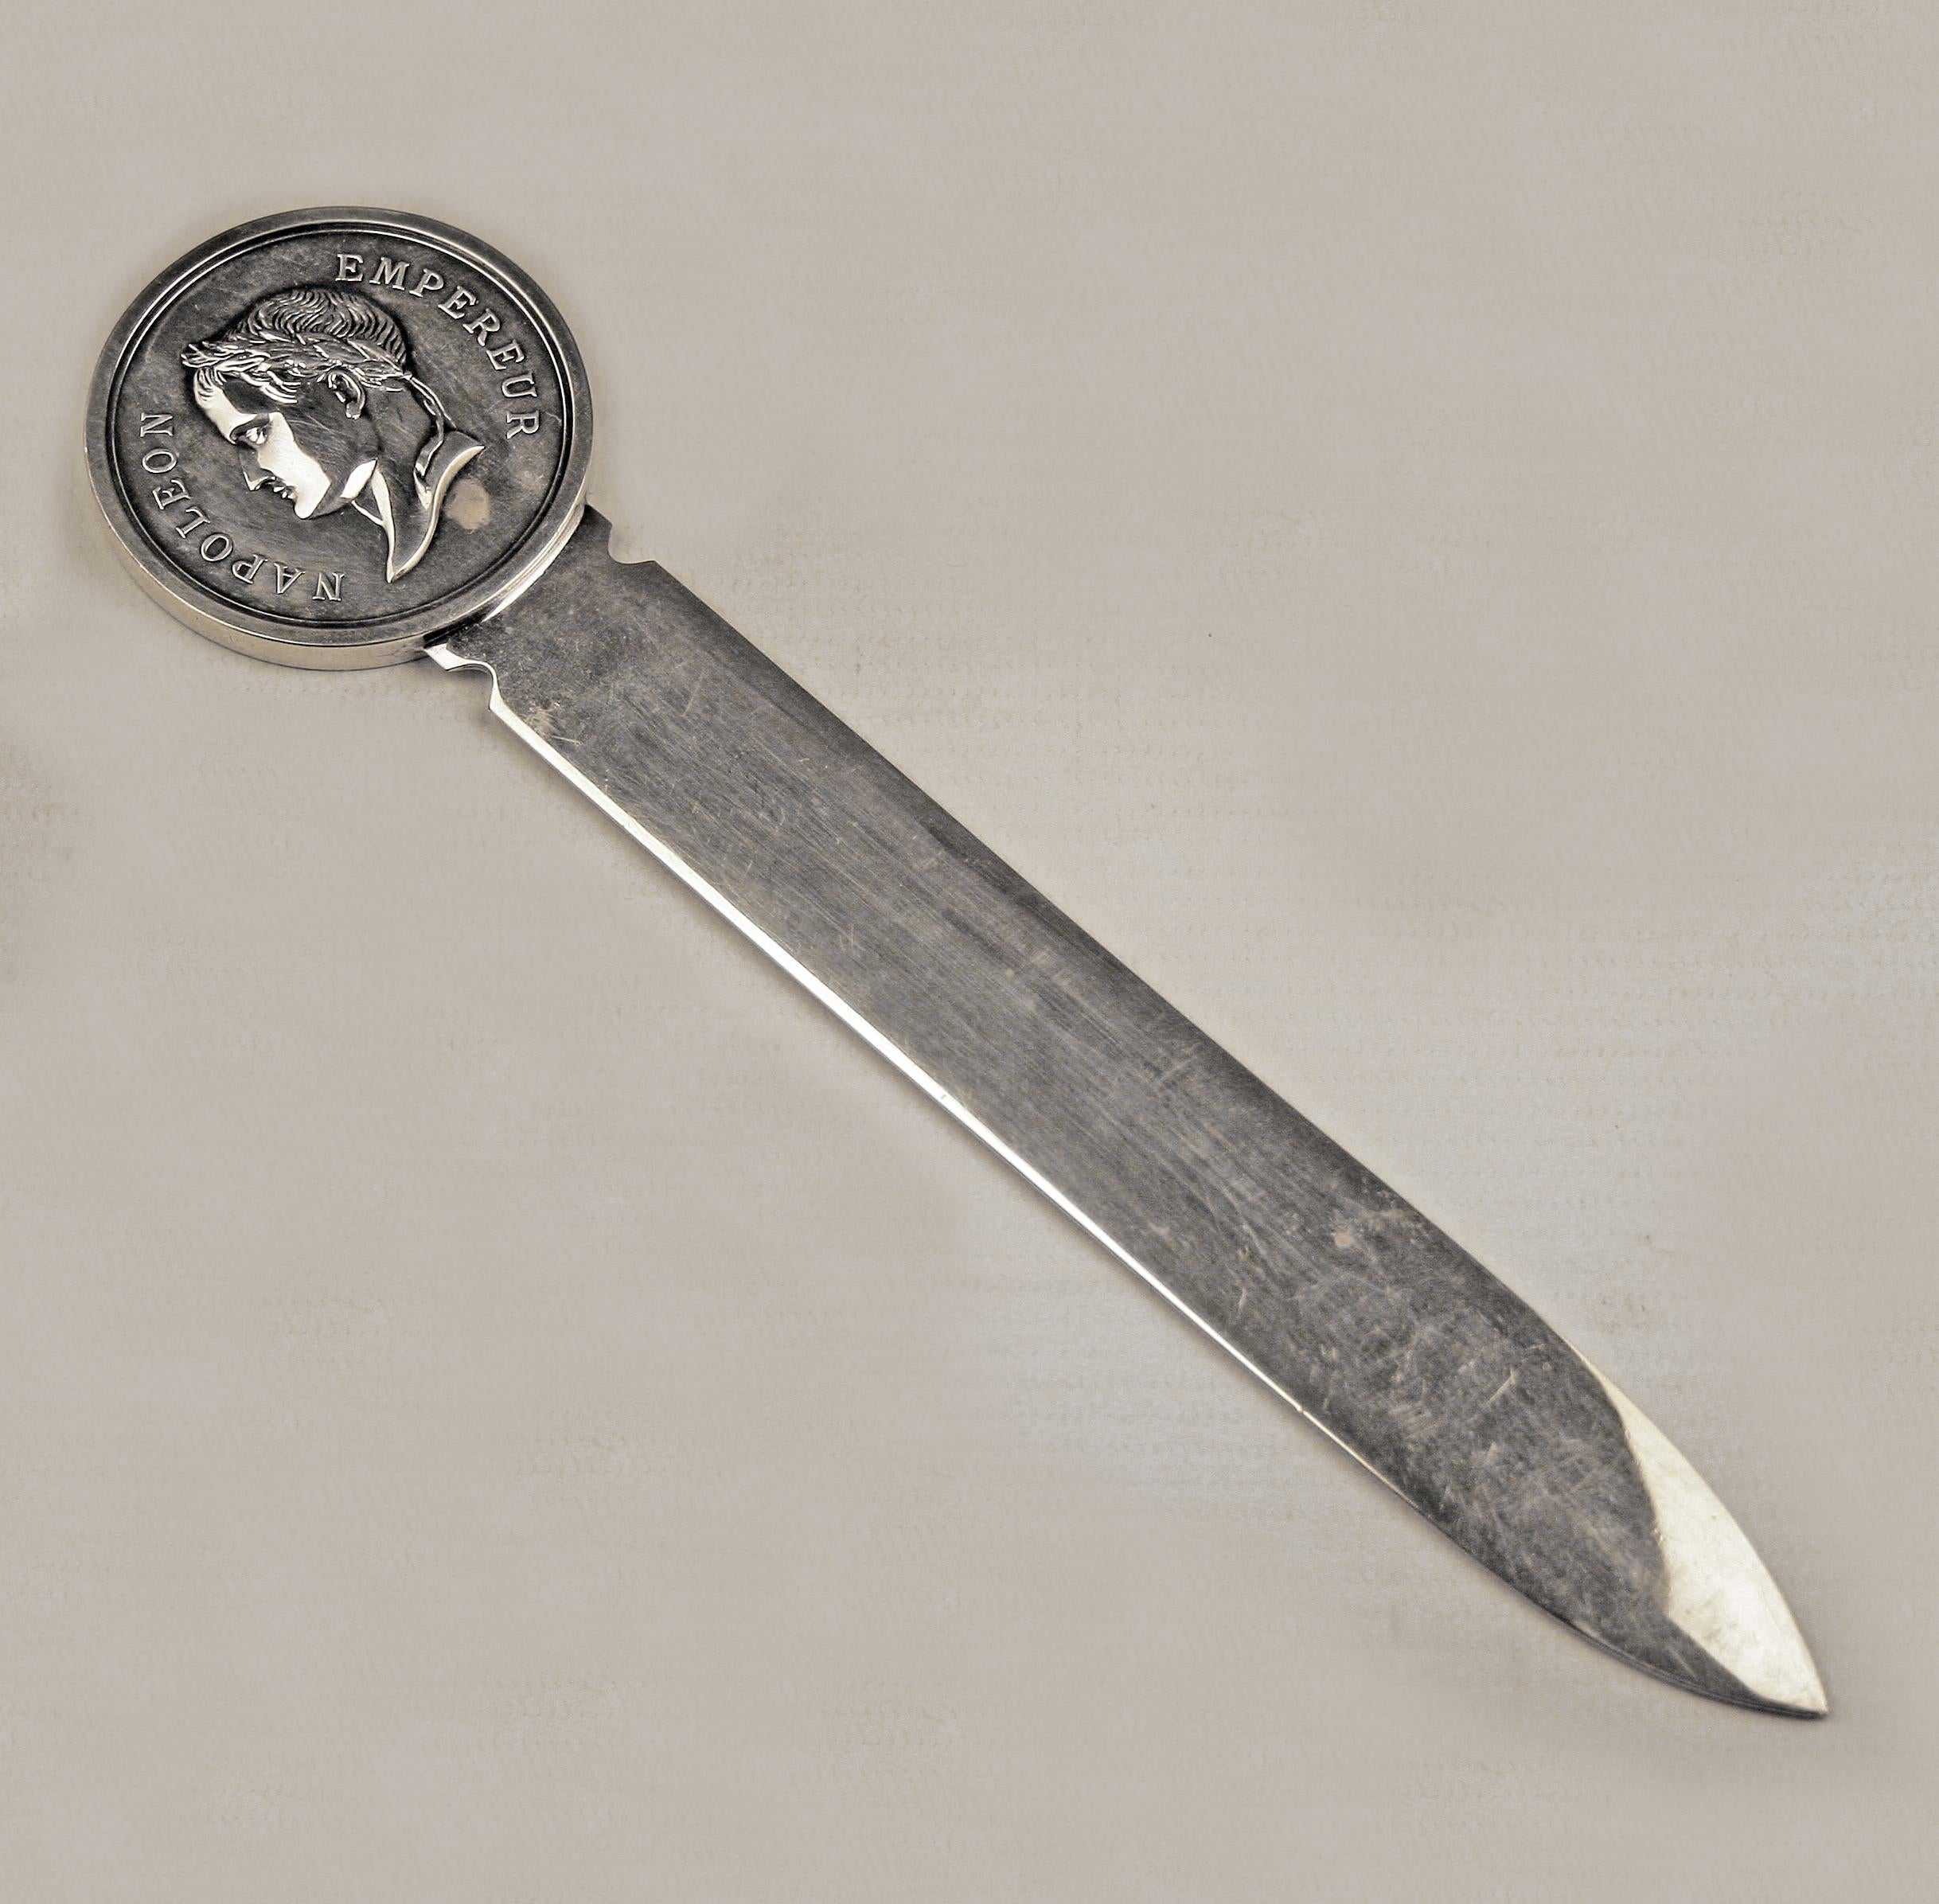 Late 20th century/circa 1970 silvered Napoleon Empereur letter opener by Christofle

By: Christofle
Material: silver, silver plate, metal, paper
Technique: polished, silvered, metalwork
Dimensions: 2 x 9 x 0.5
Date: late 20th century, circa